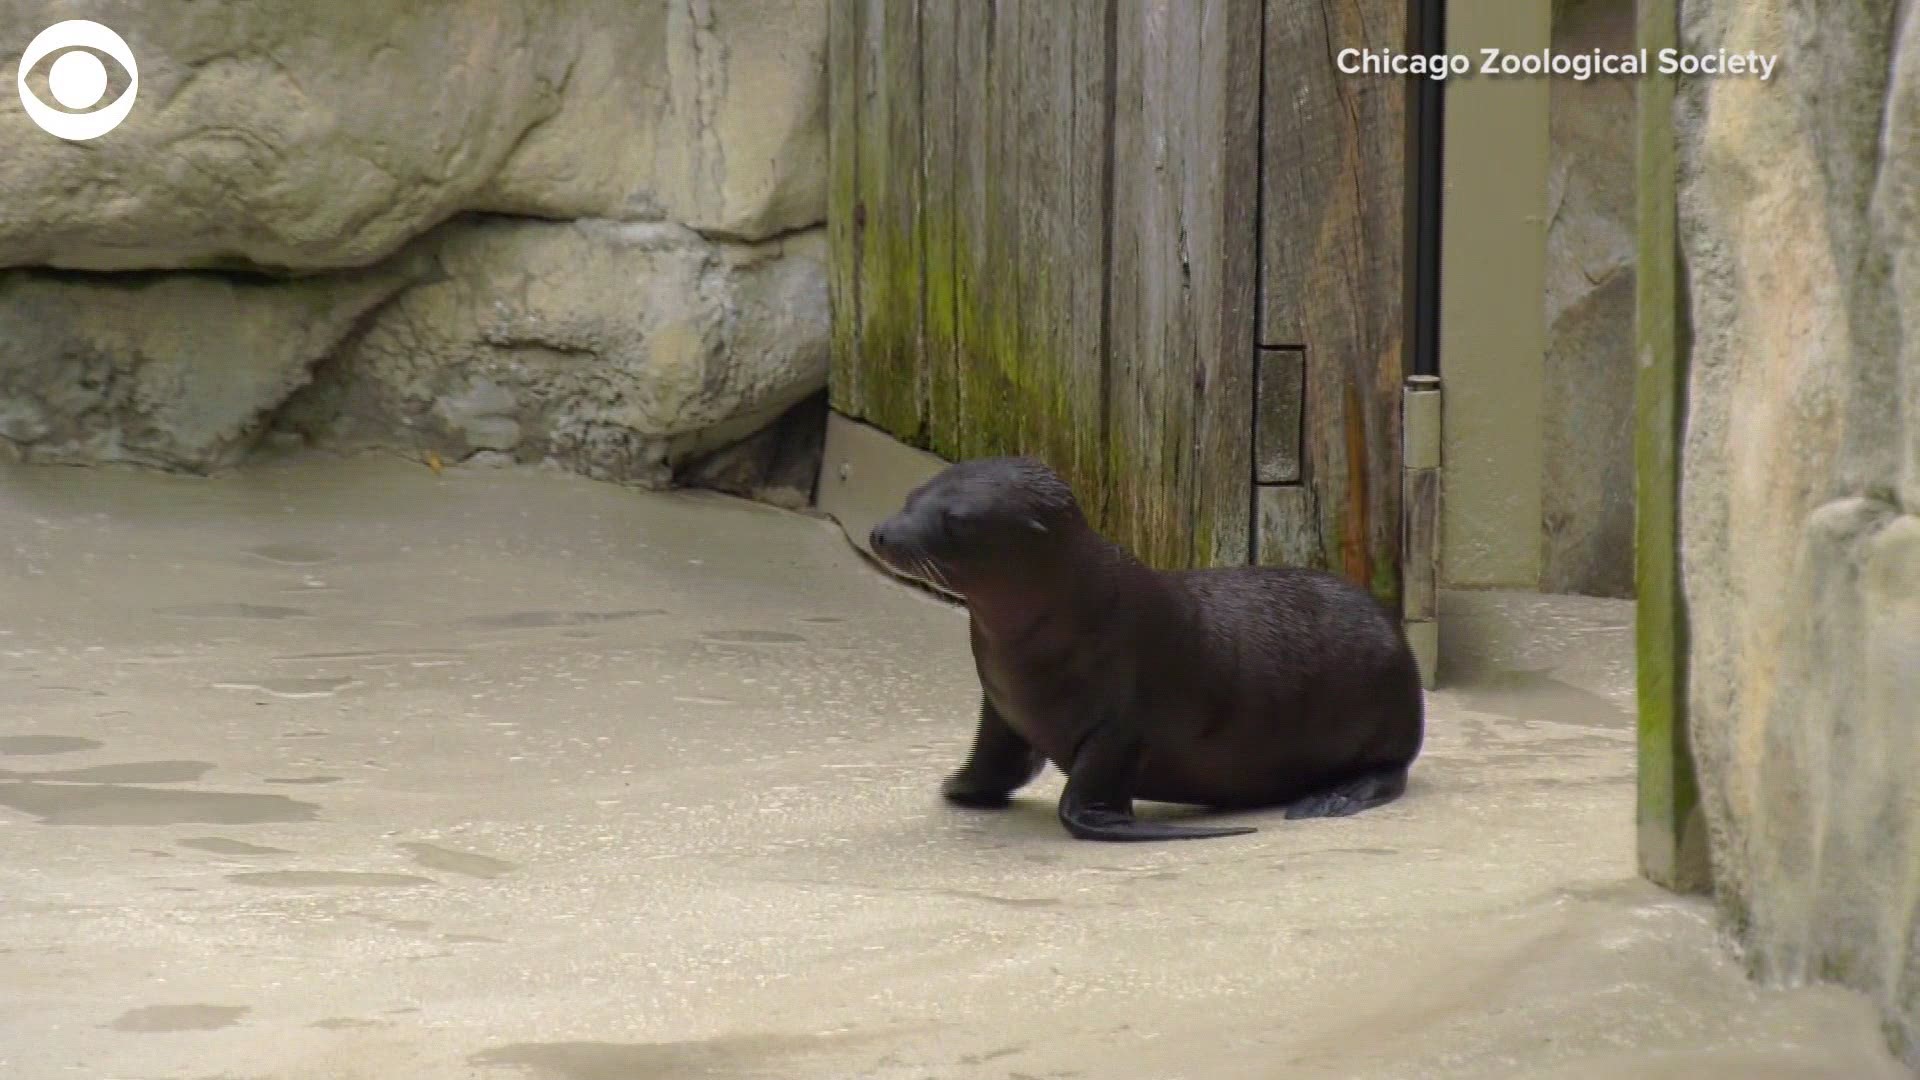 Say hello to Charger the California sea lion! The pup was born last month and just made his debut at Brookfield Zoo in Illinois.